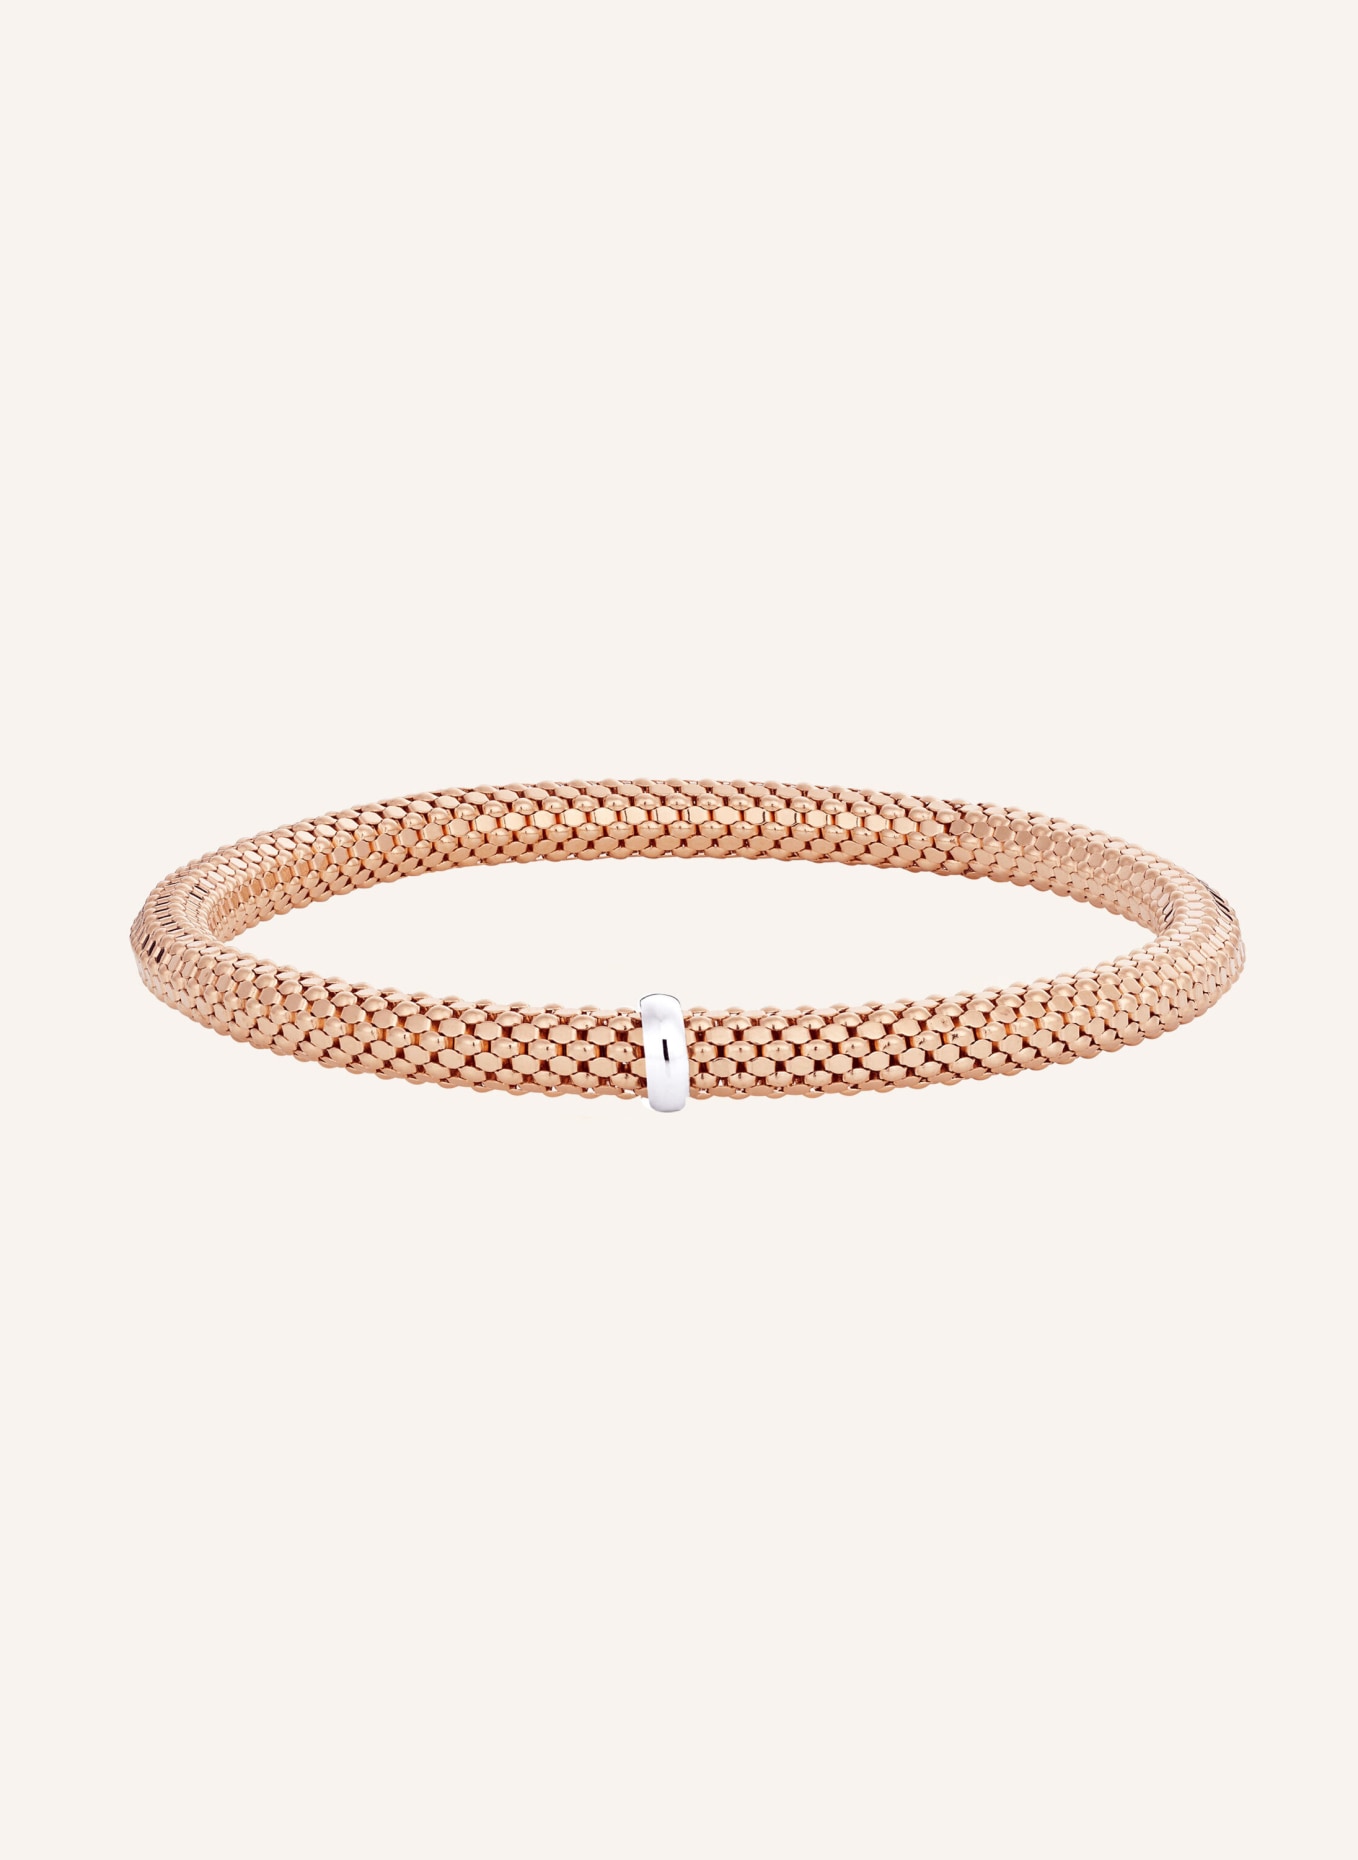 WEMPE Armband MINIMALISM by Wempe Casuals, Farbe: ROSÉGOLD (Bild 1)